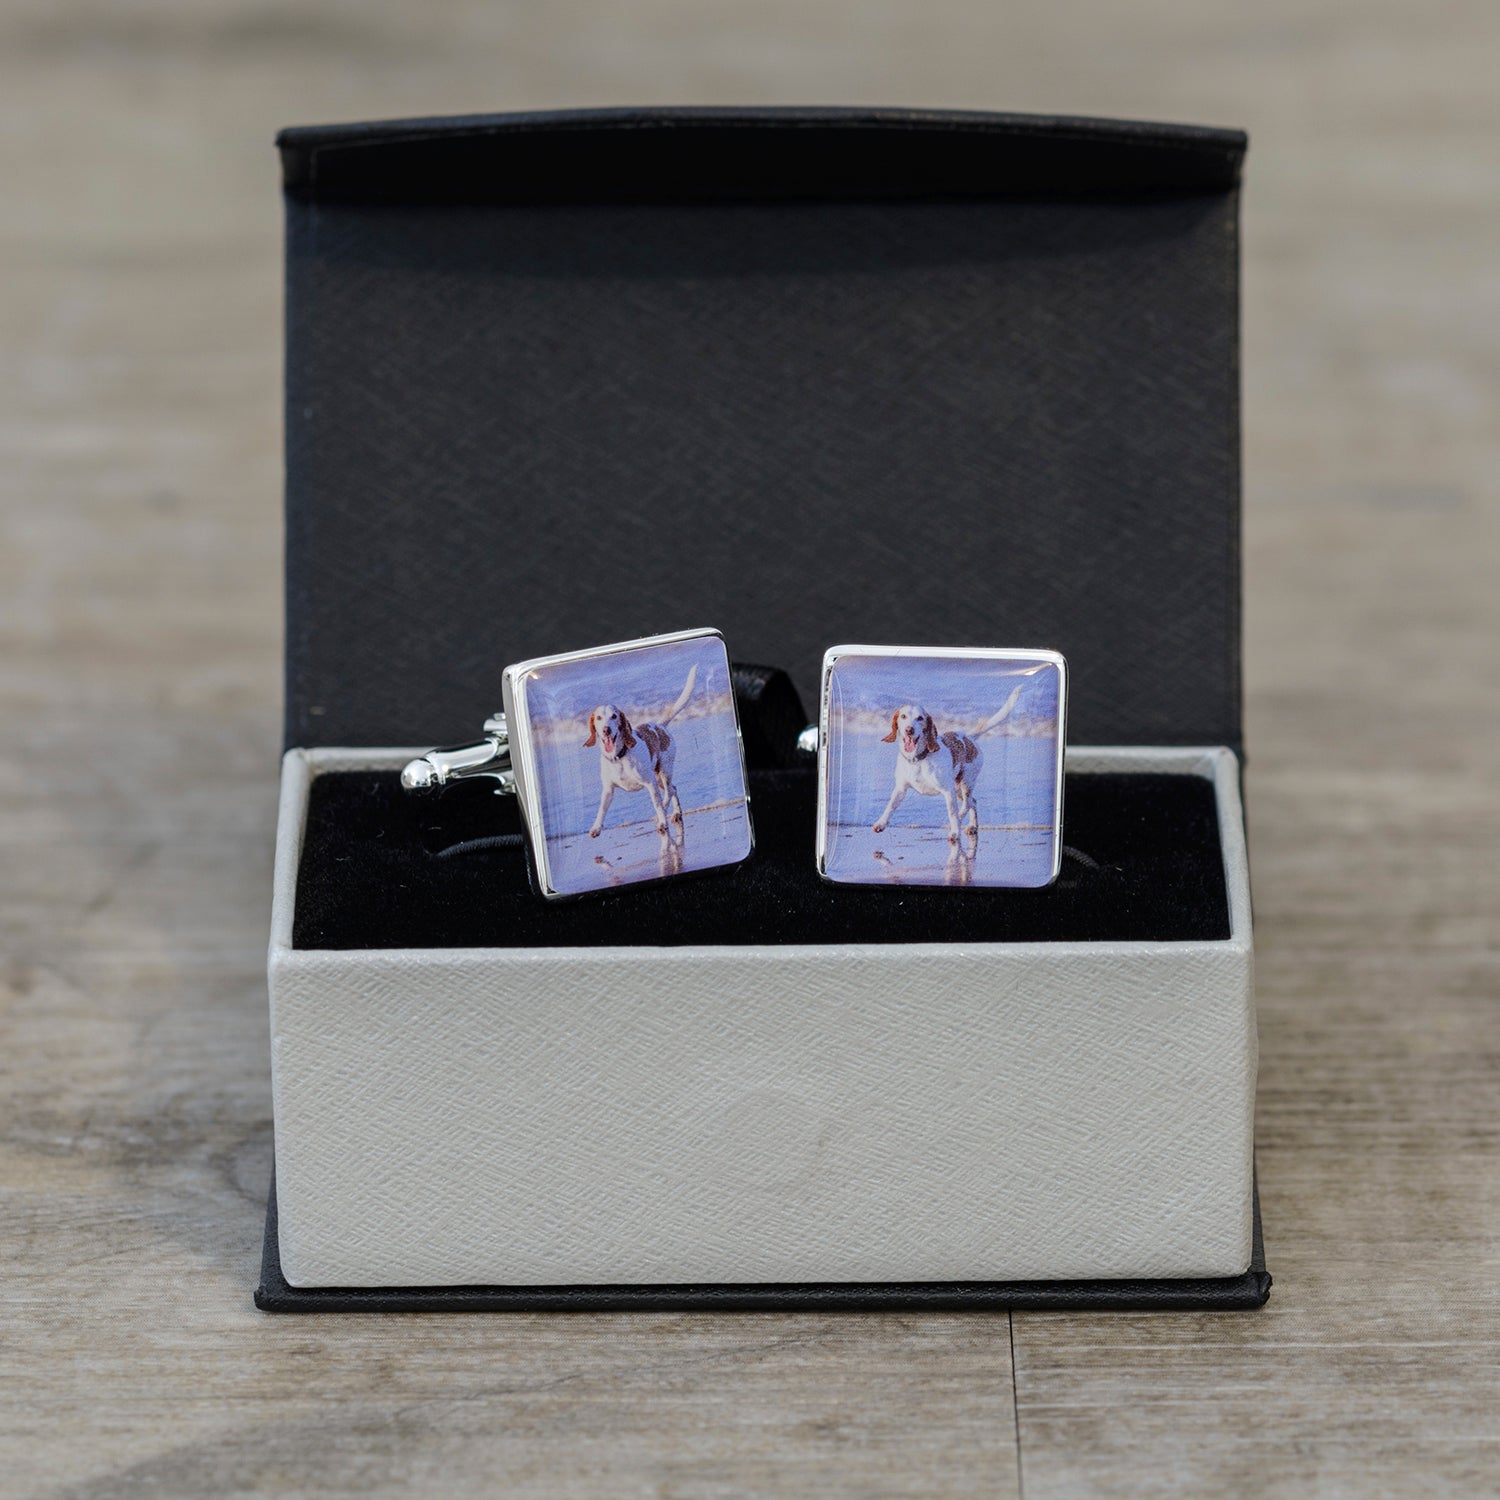 Double photo cufflinks in high quality silver finish, upload a different photo for each cufflink or keep them as a pair. Shown in presentation gift box.